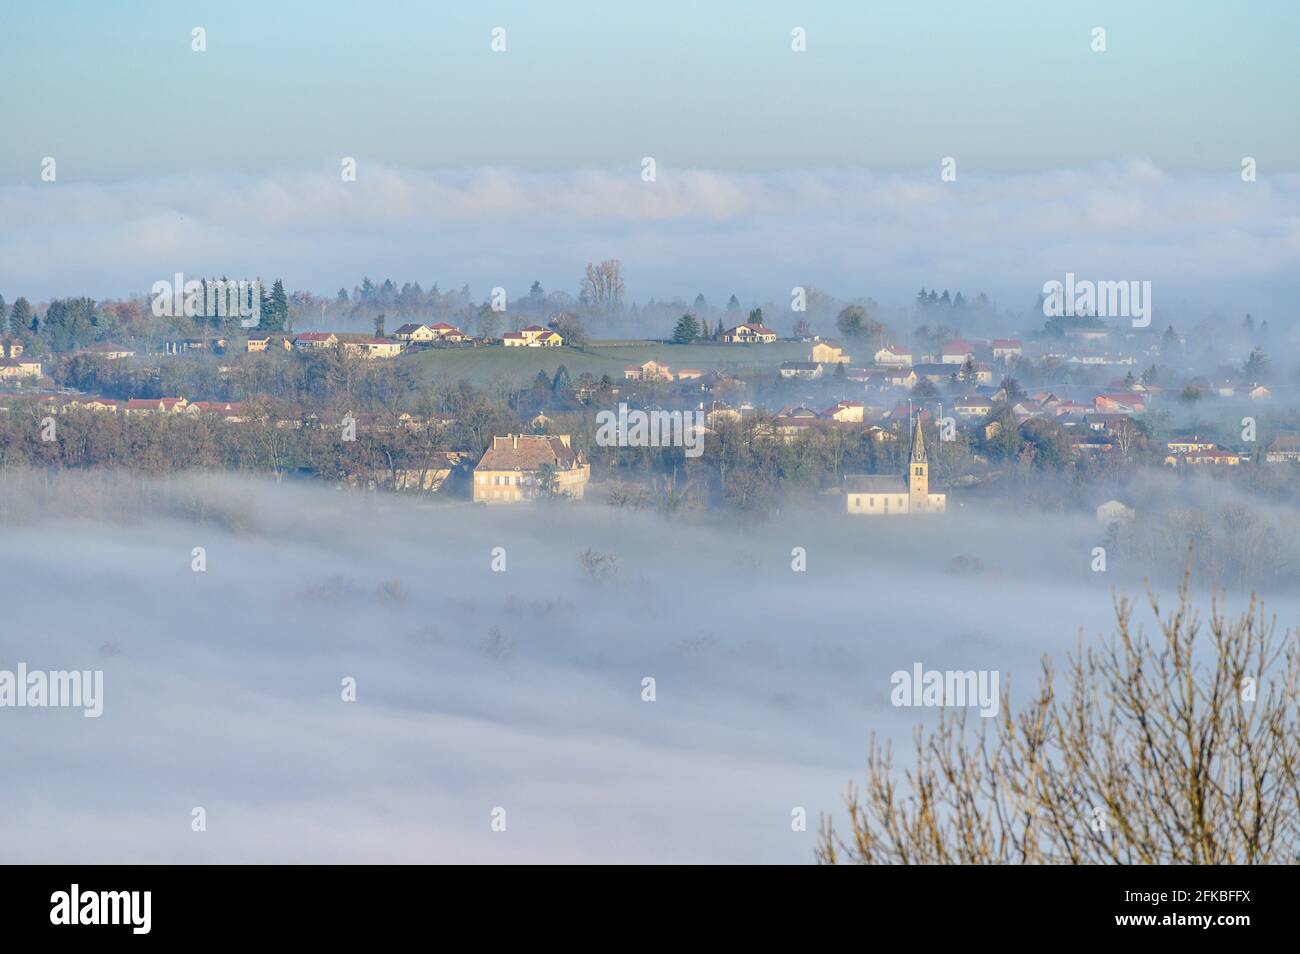 Beautiful aerial view of a town covered in mist, fog. Stock Photo